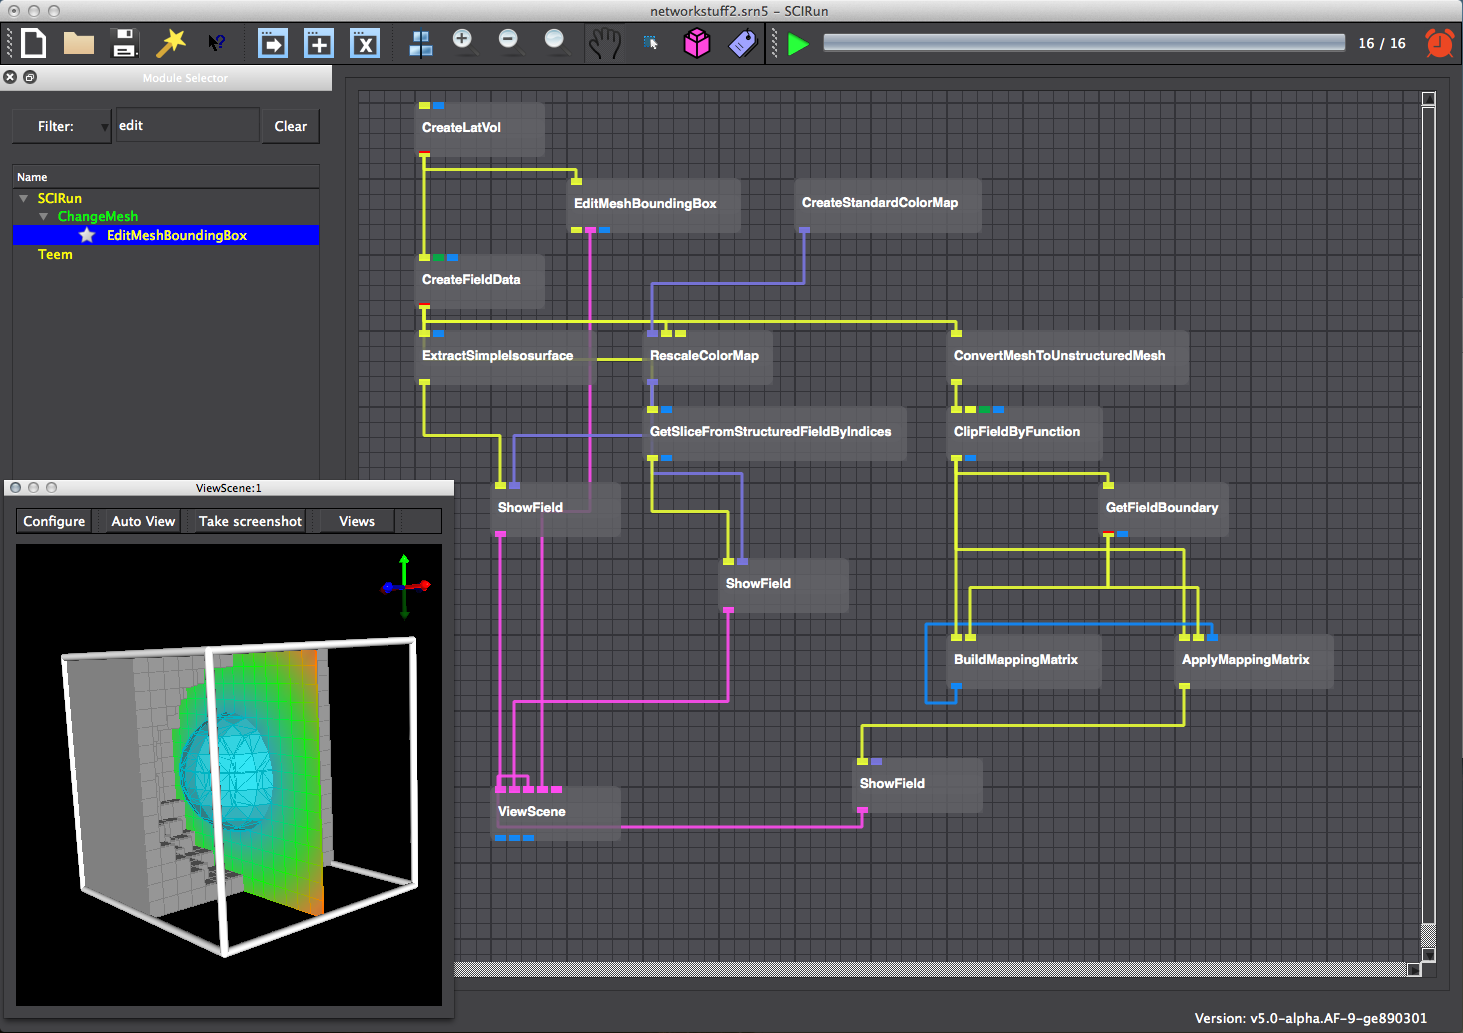 Connect all the modules for mapping and visualize the output.